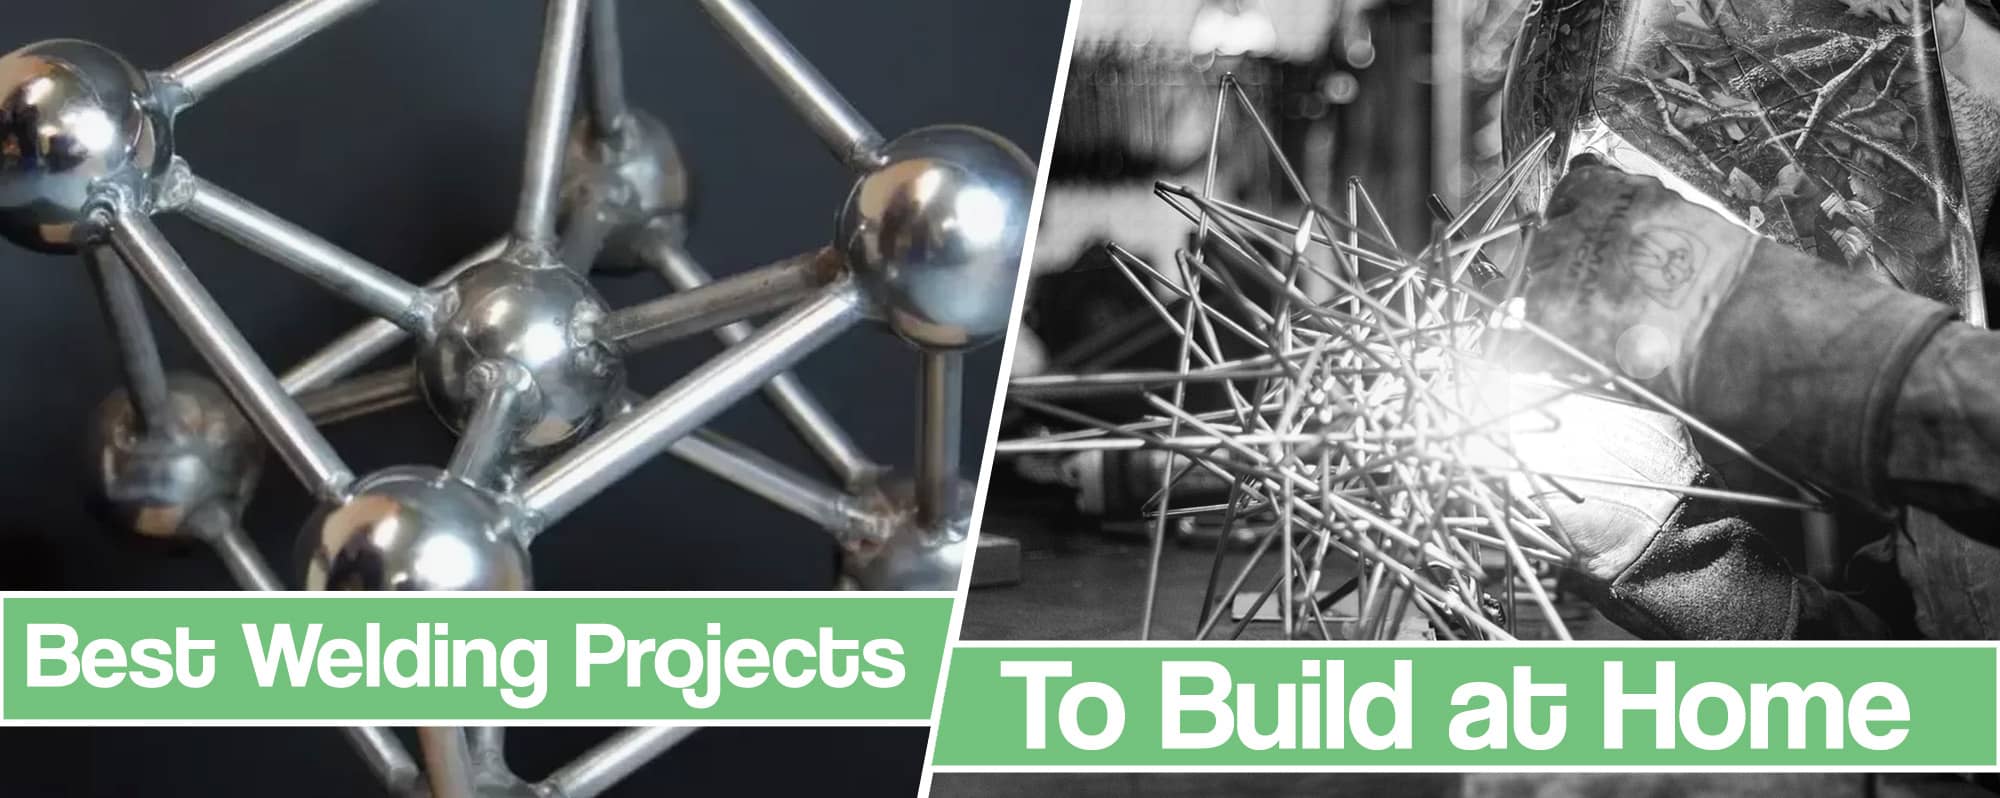 61 Best Welding Projects to Build at Home – Excellent Ideas For Beginners and Professionals